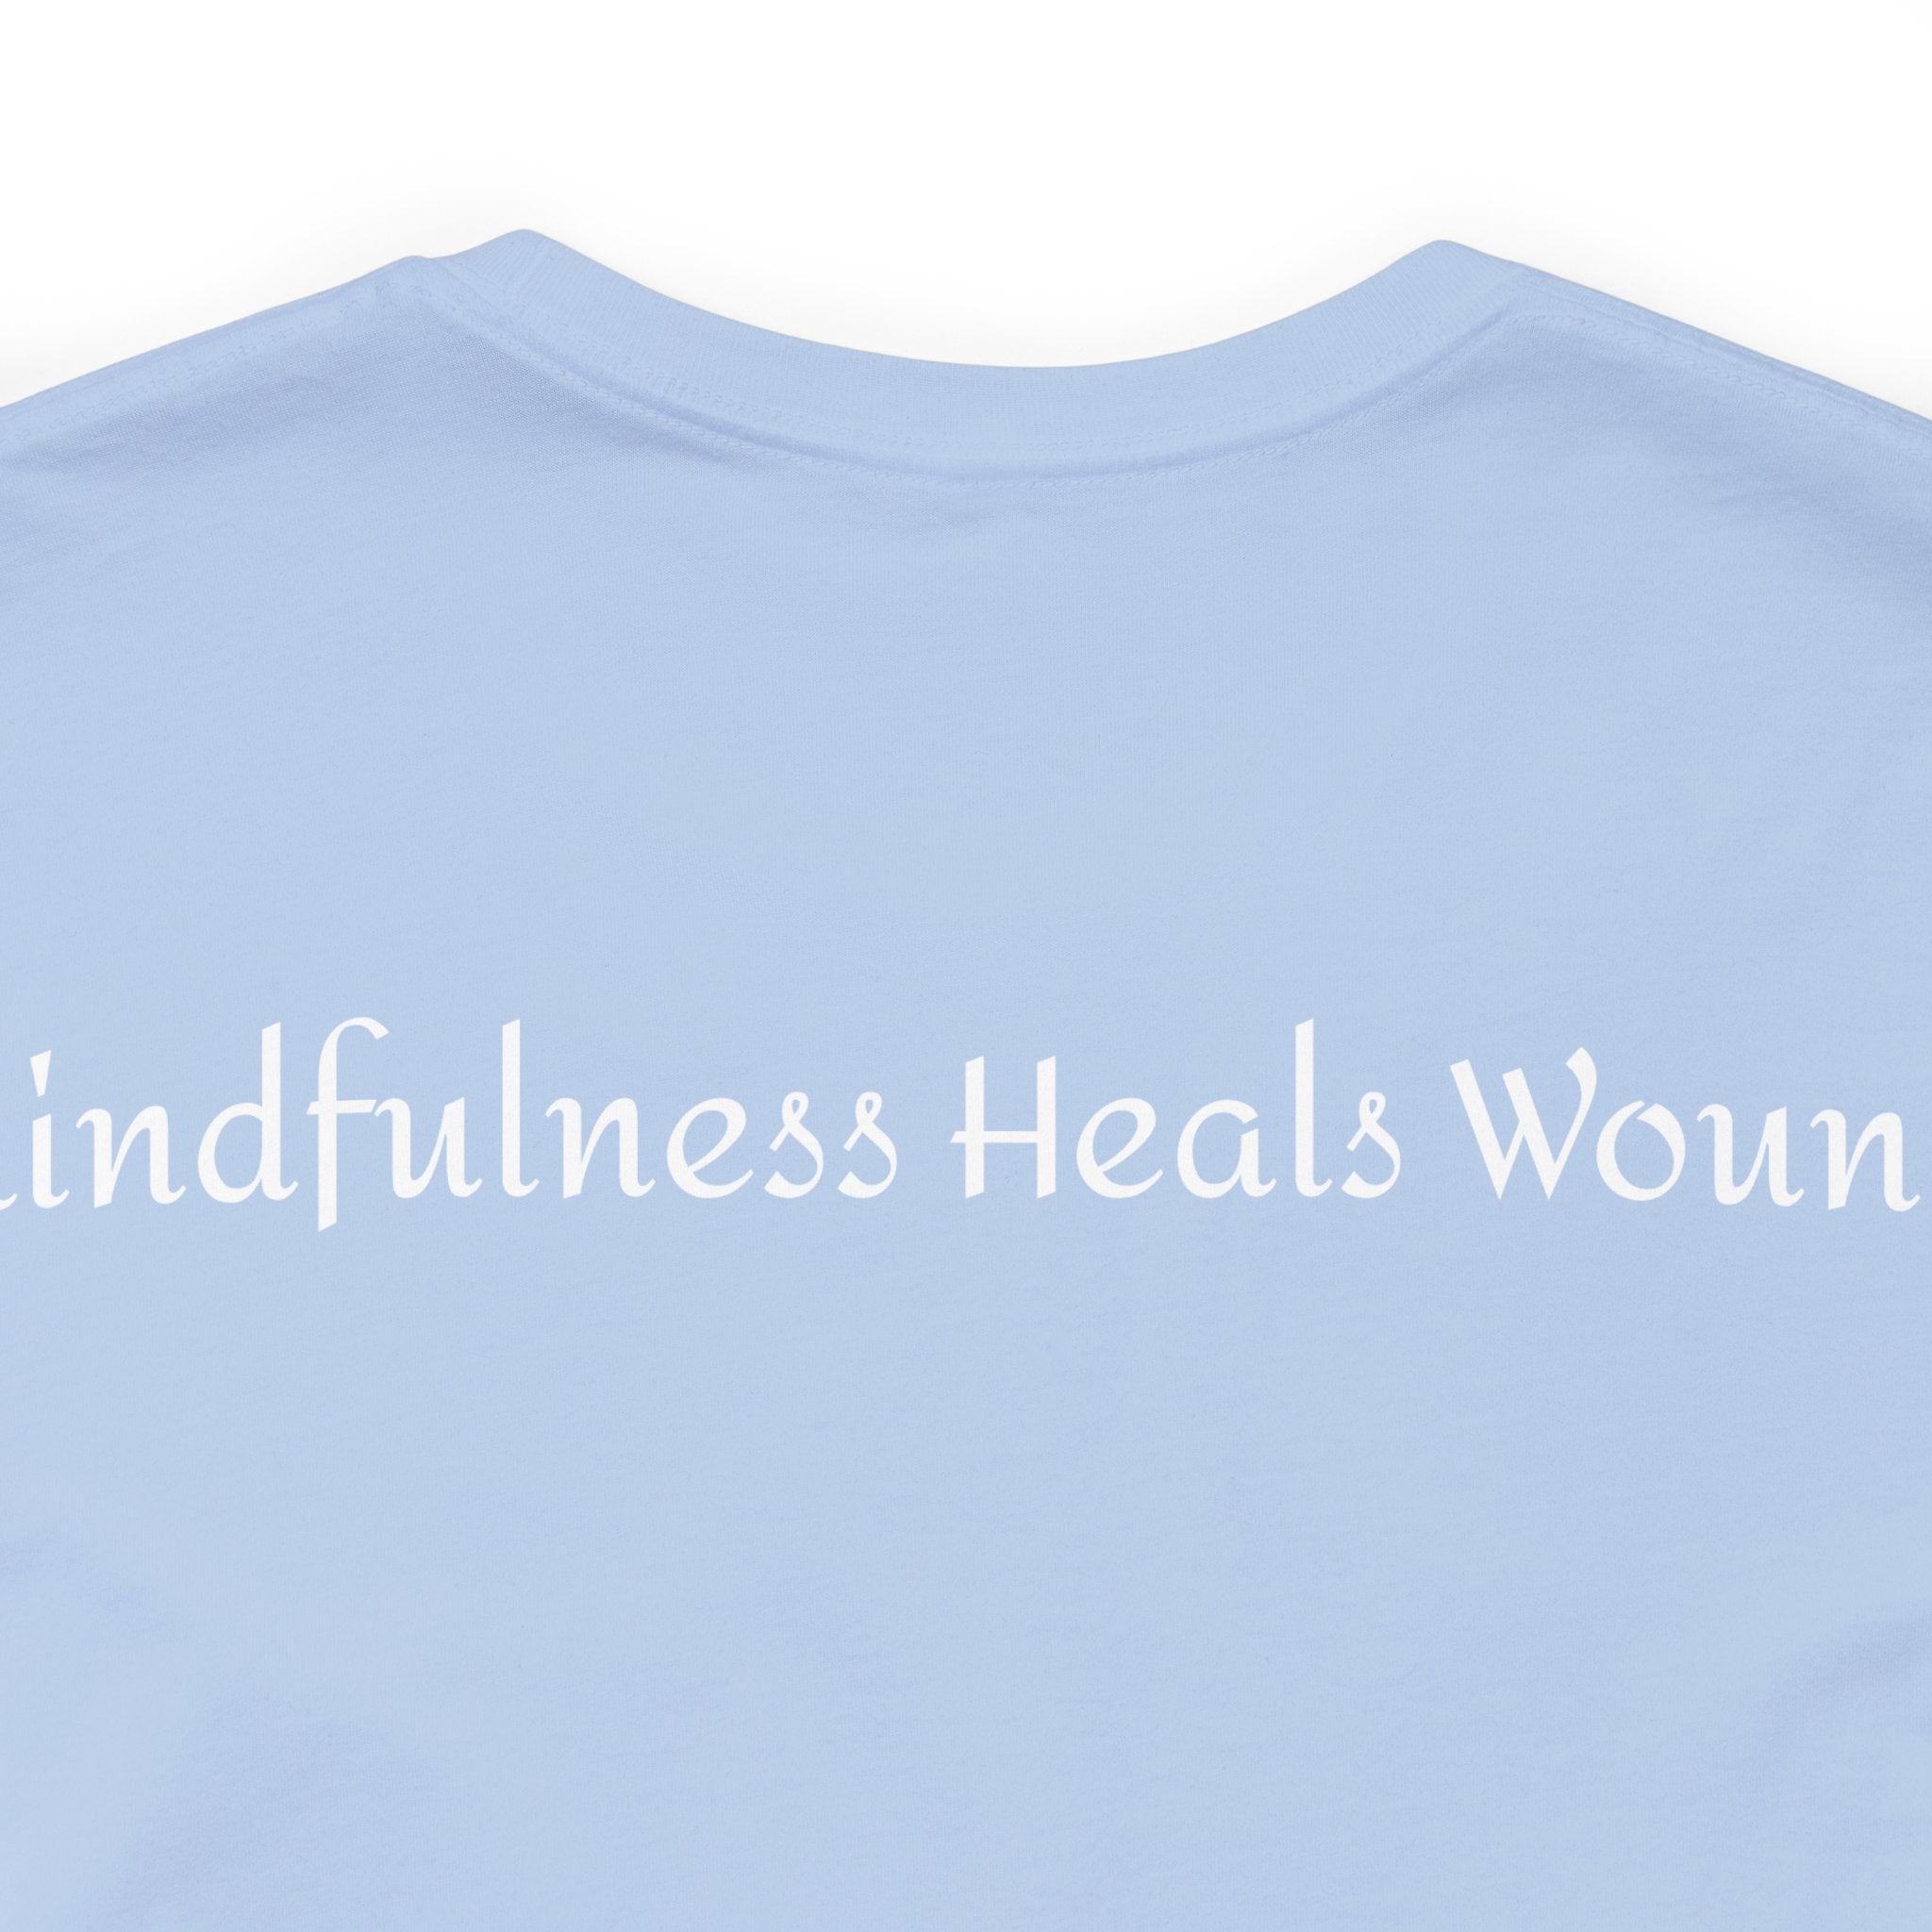 Mindfulness Heals Wounds Tee - Bella+Canvas 3001 Turquoise Airlume Cotton Bella+Canvas 3001 Crew Neckline Jersey Short Sleeve Lightweight Fabric Mental Health Support Retail Fit Tear-away Label Tee Unisex Tee T-Shirt 14254080541458347596_2048 Printify